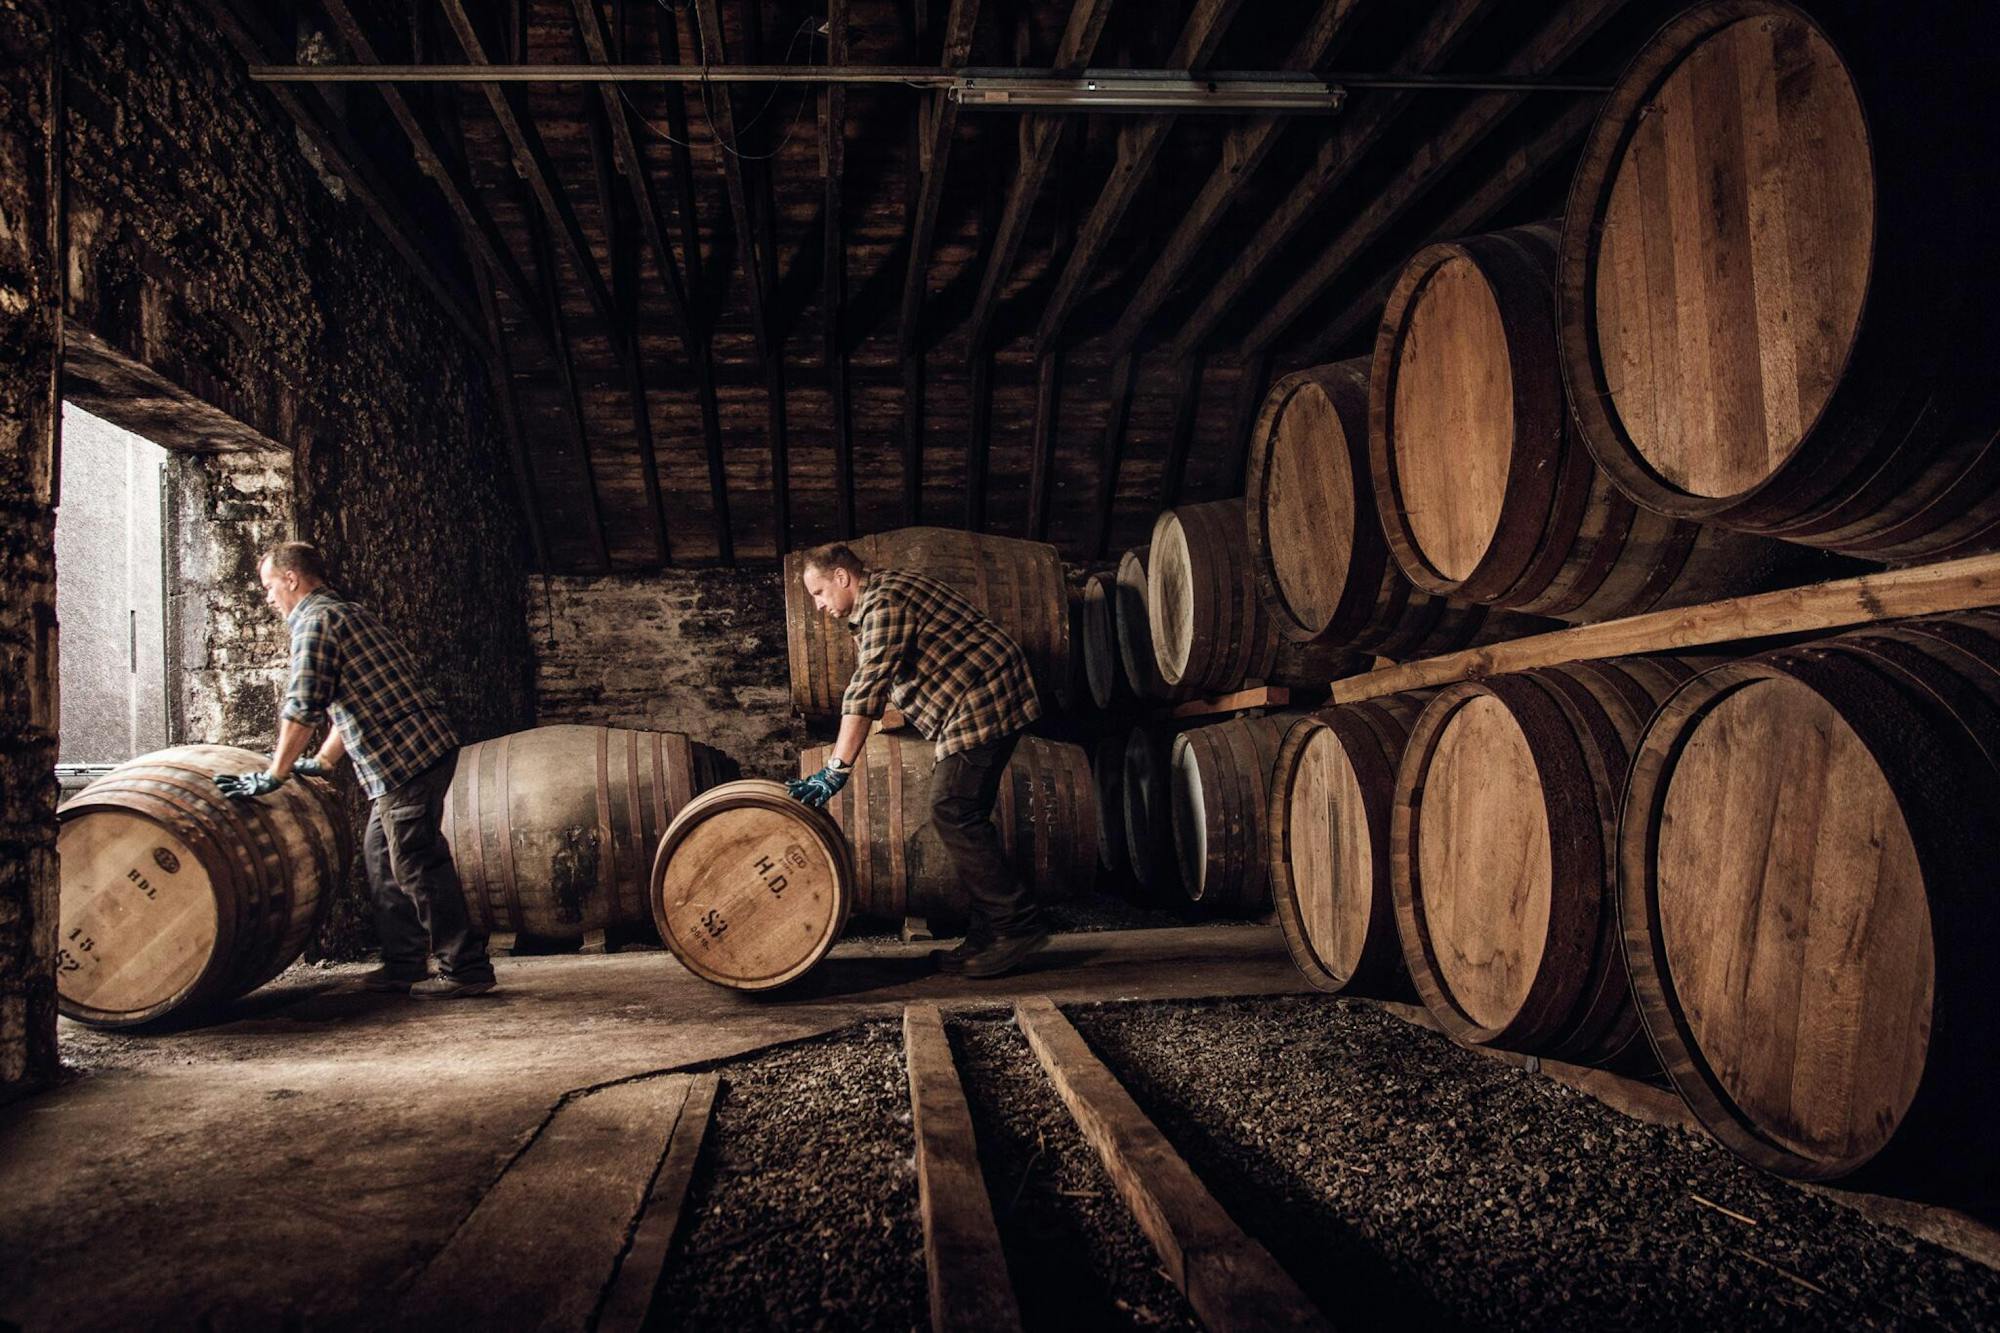 Walpole Editorial Why there's more to whisky than Scotch by Aleks Cvetkovic 